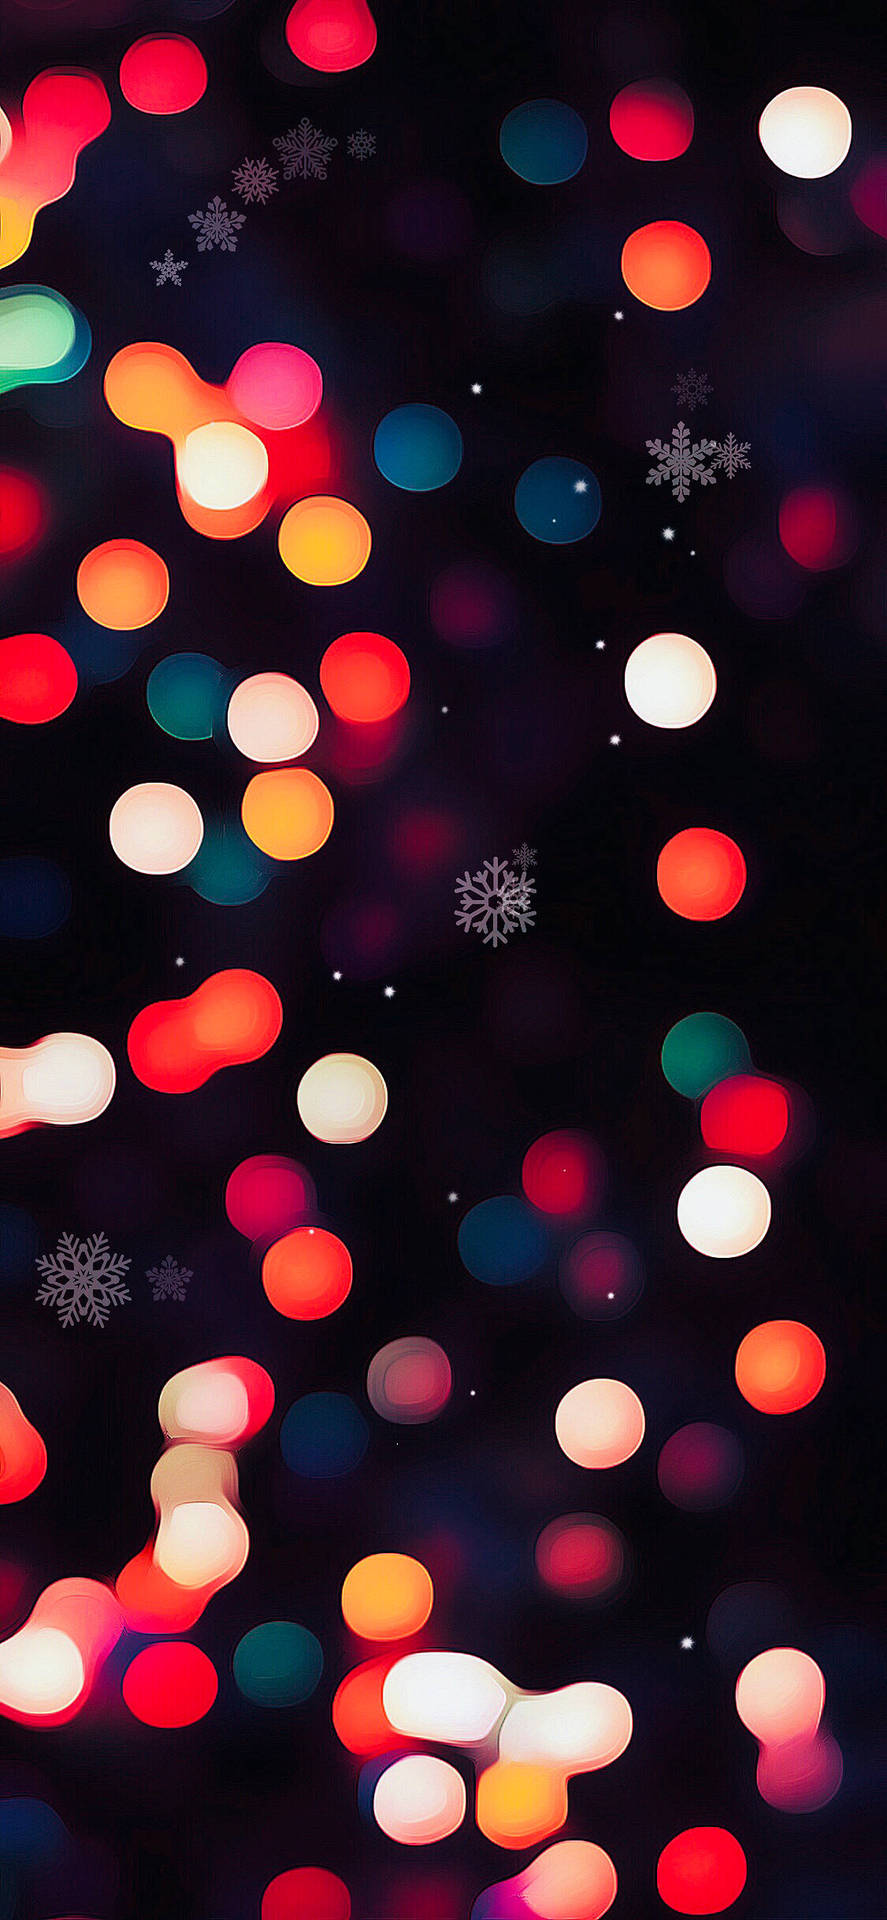 Snowflakes For Aesthetic Christmas Iphone Background